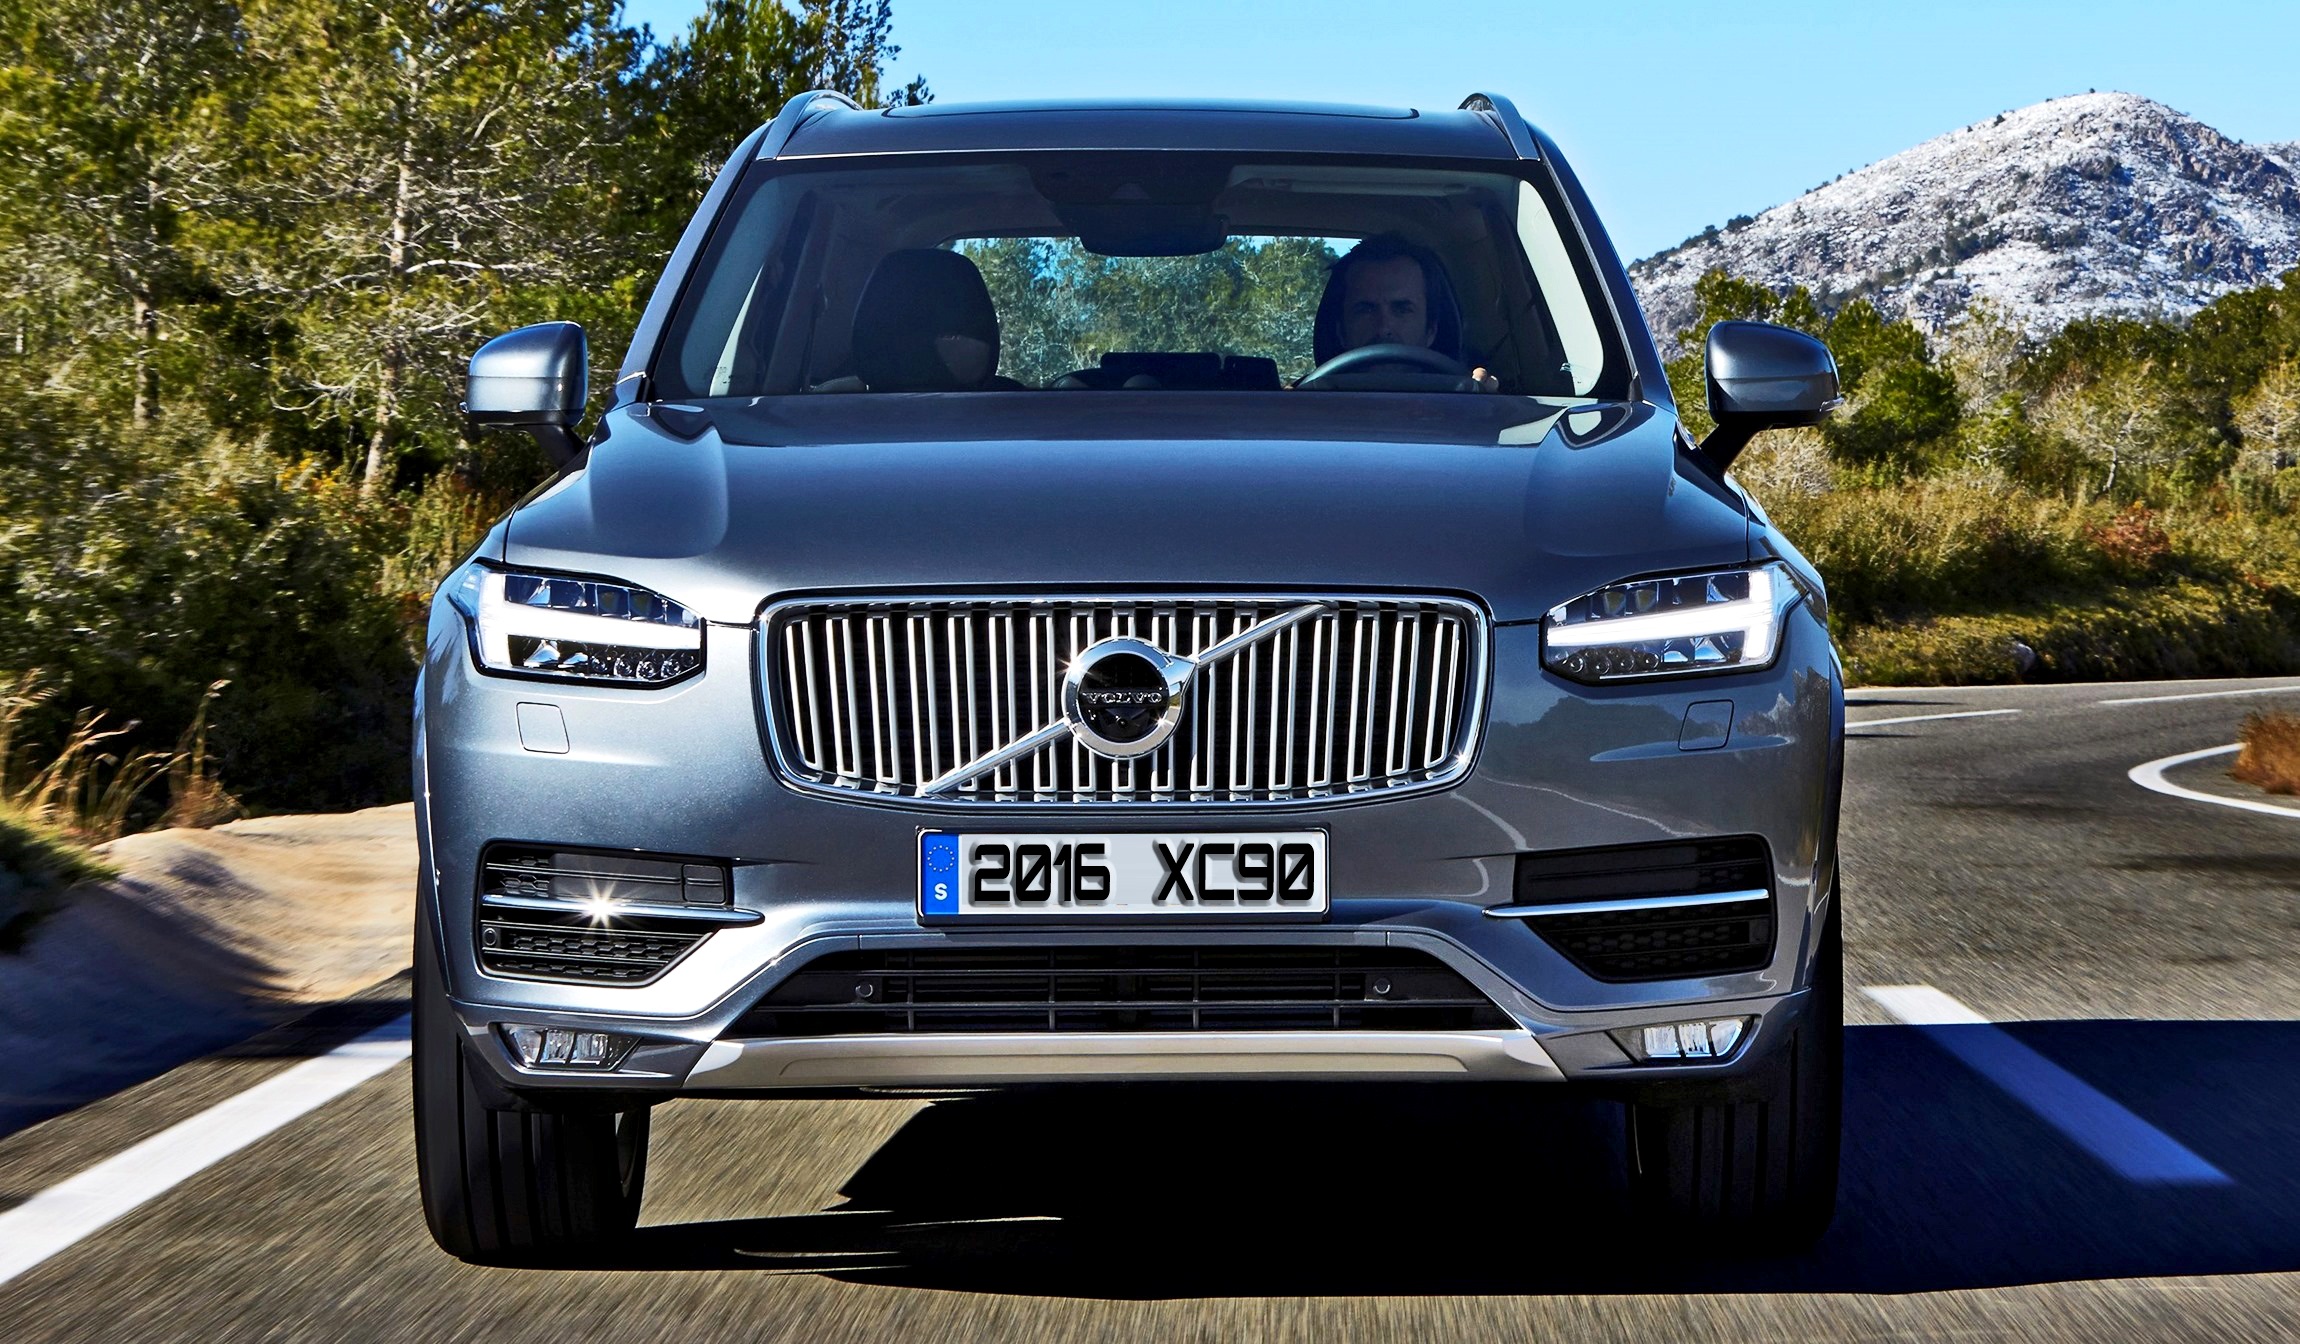 Volvo Xc90 HD Pictures Background Autoshow Wallpaper